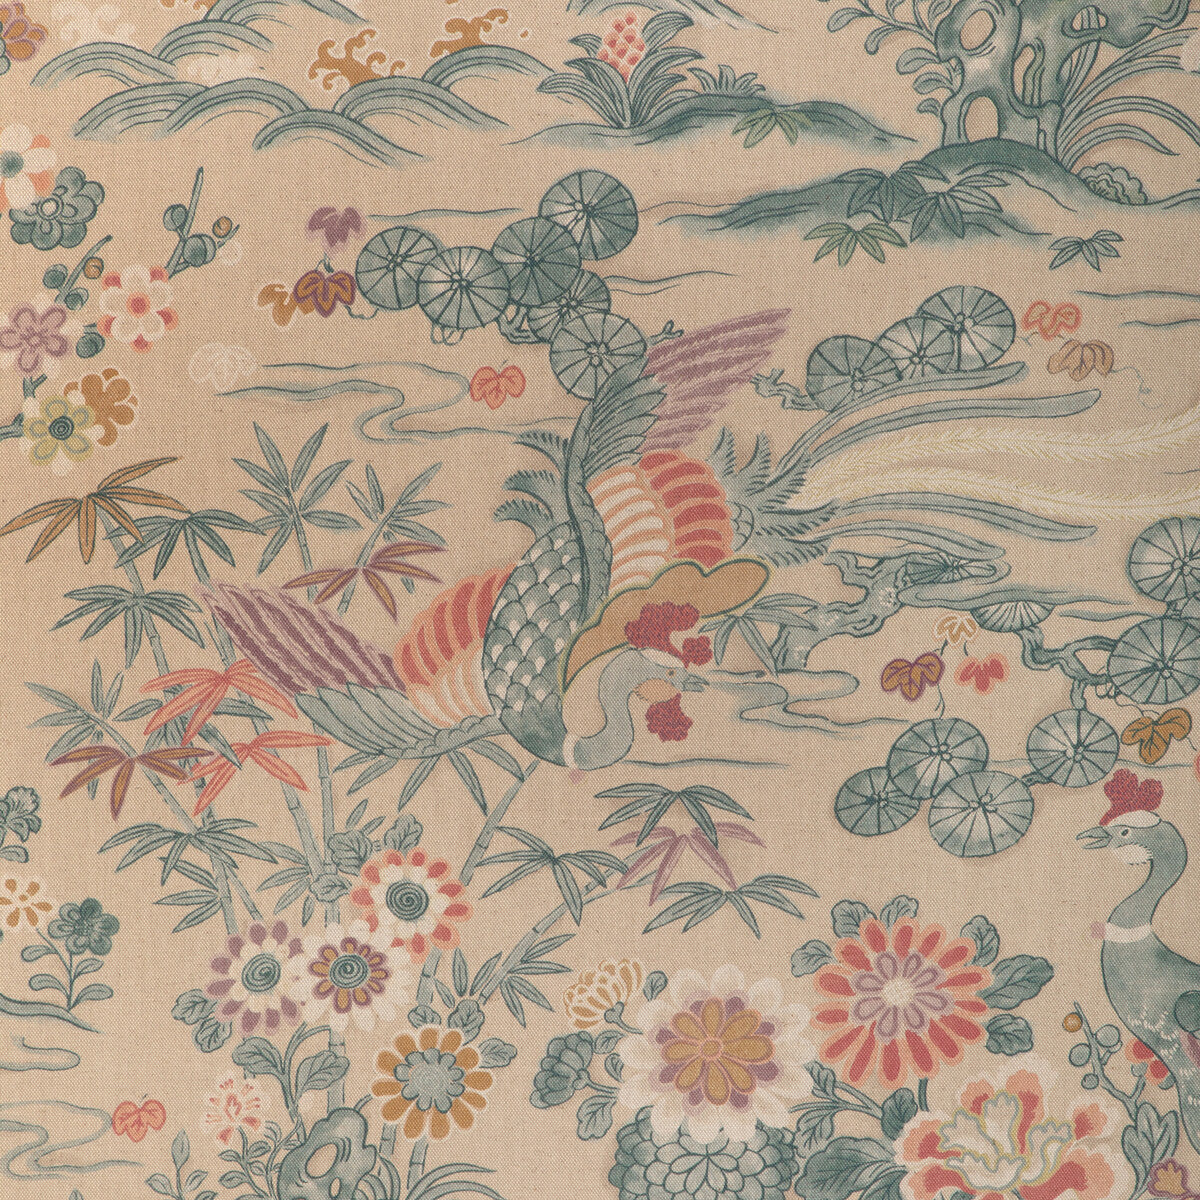 Sakura Print fabric in shore color - pattern 2023139.1613.0 - by Lee Jofa in the Garden Walk collection